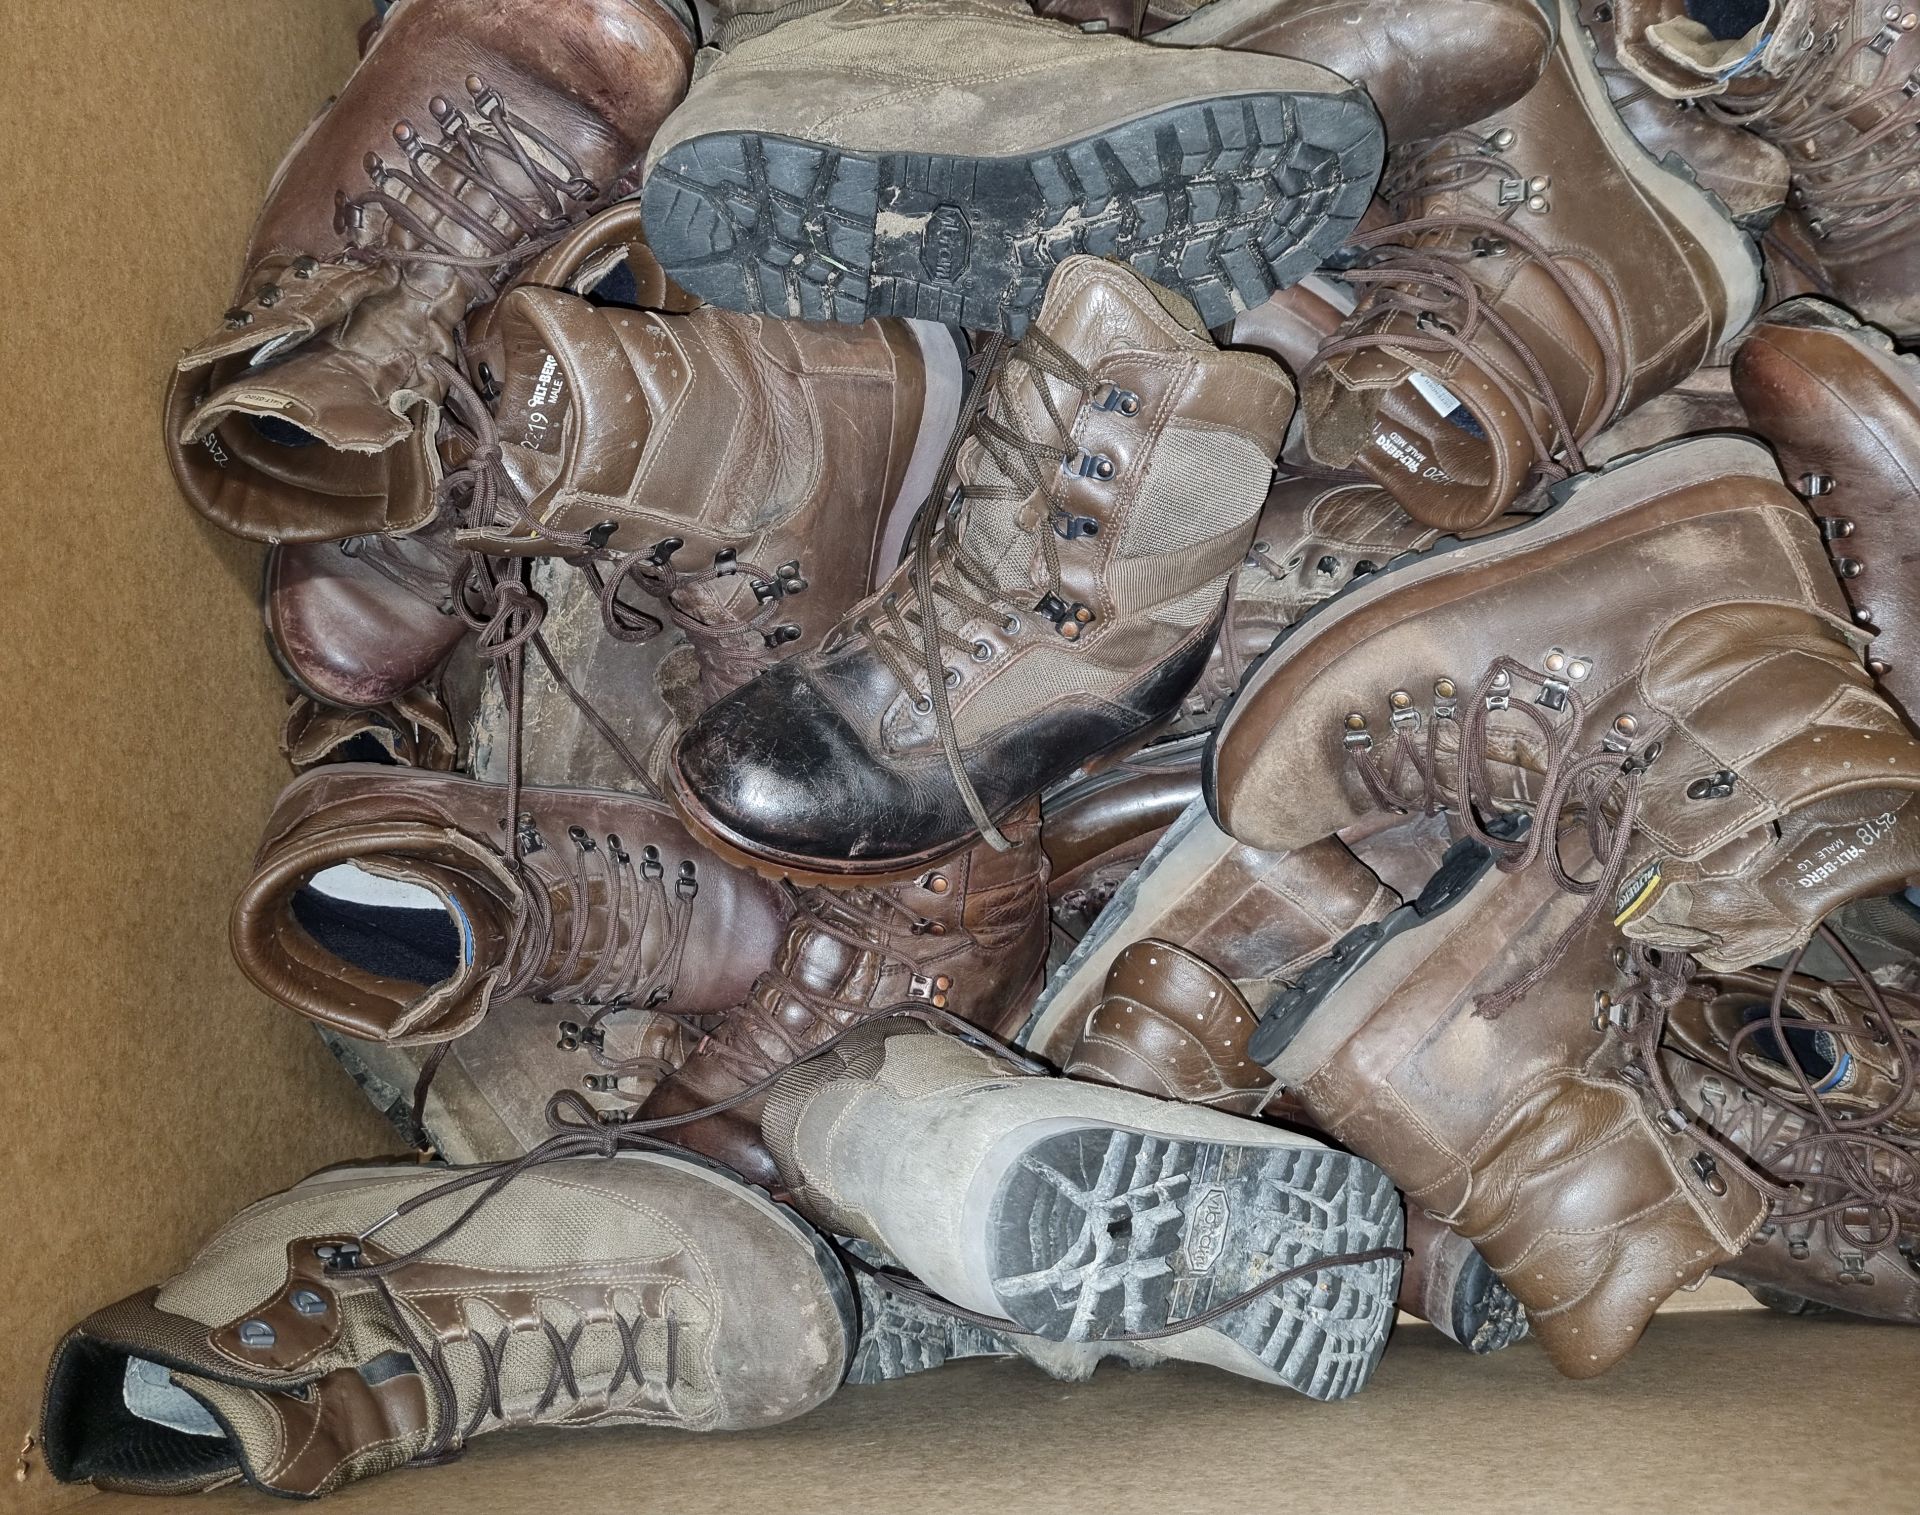 50x pairs of Various Boots including Magnum, Iturri & YDS - mixed grades and sizes - Image 5 of 5